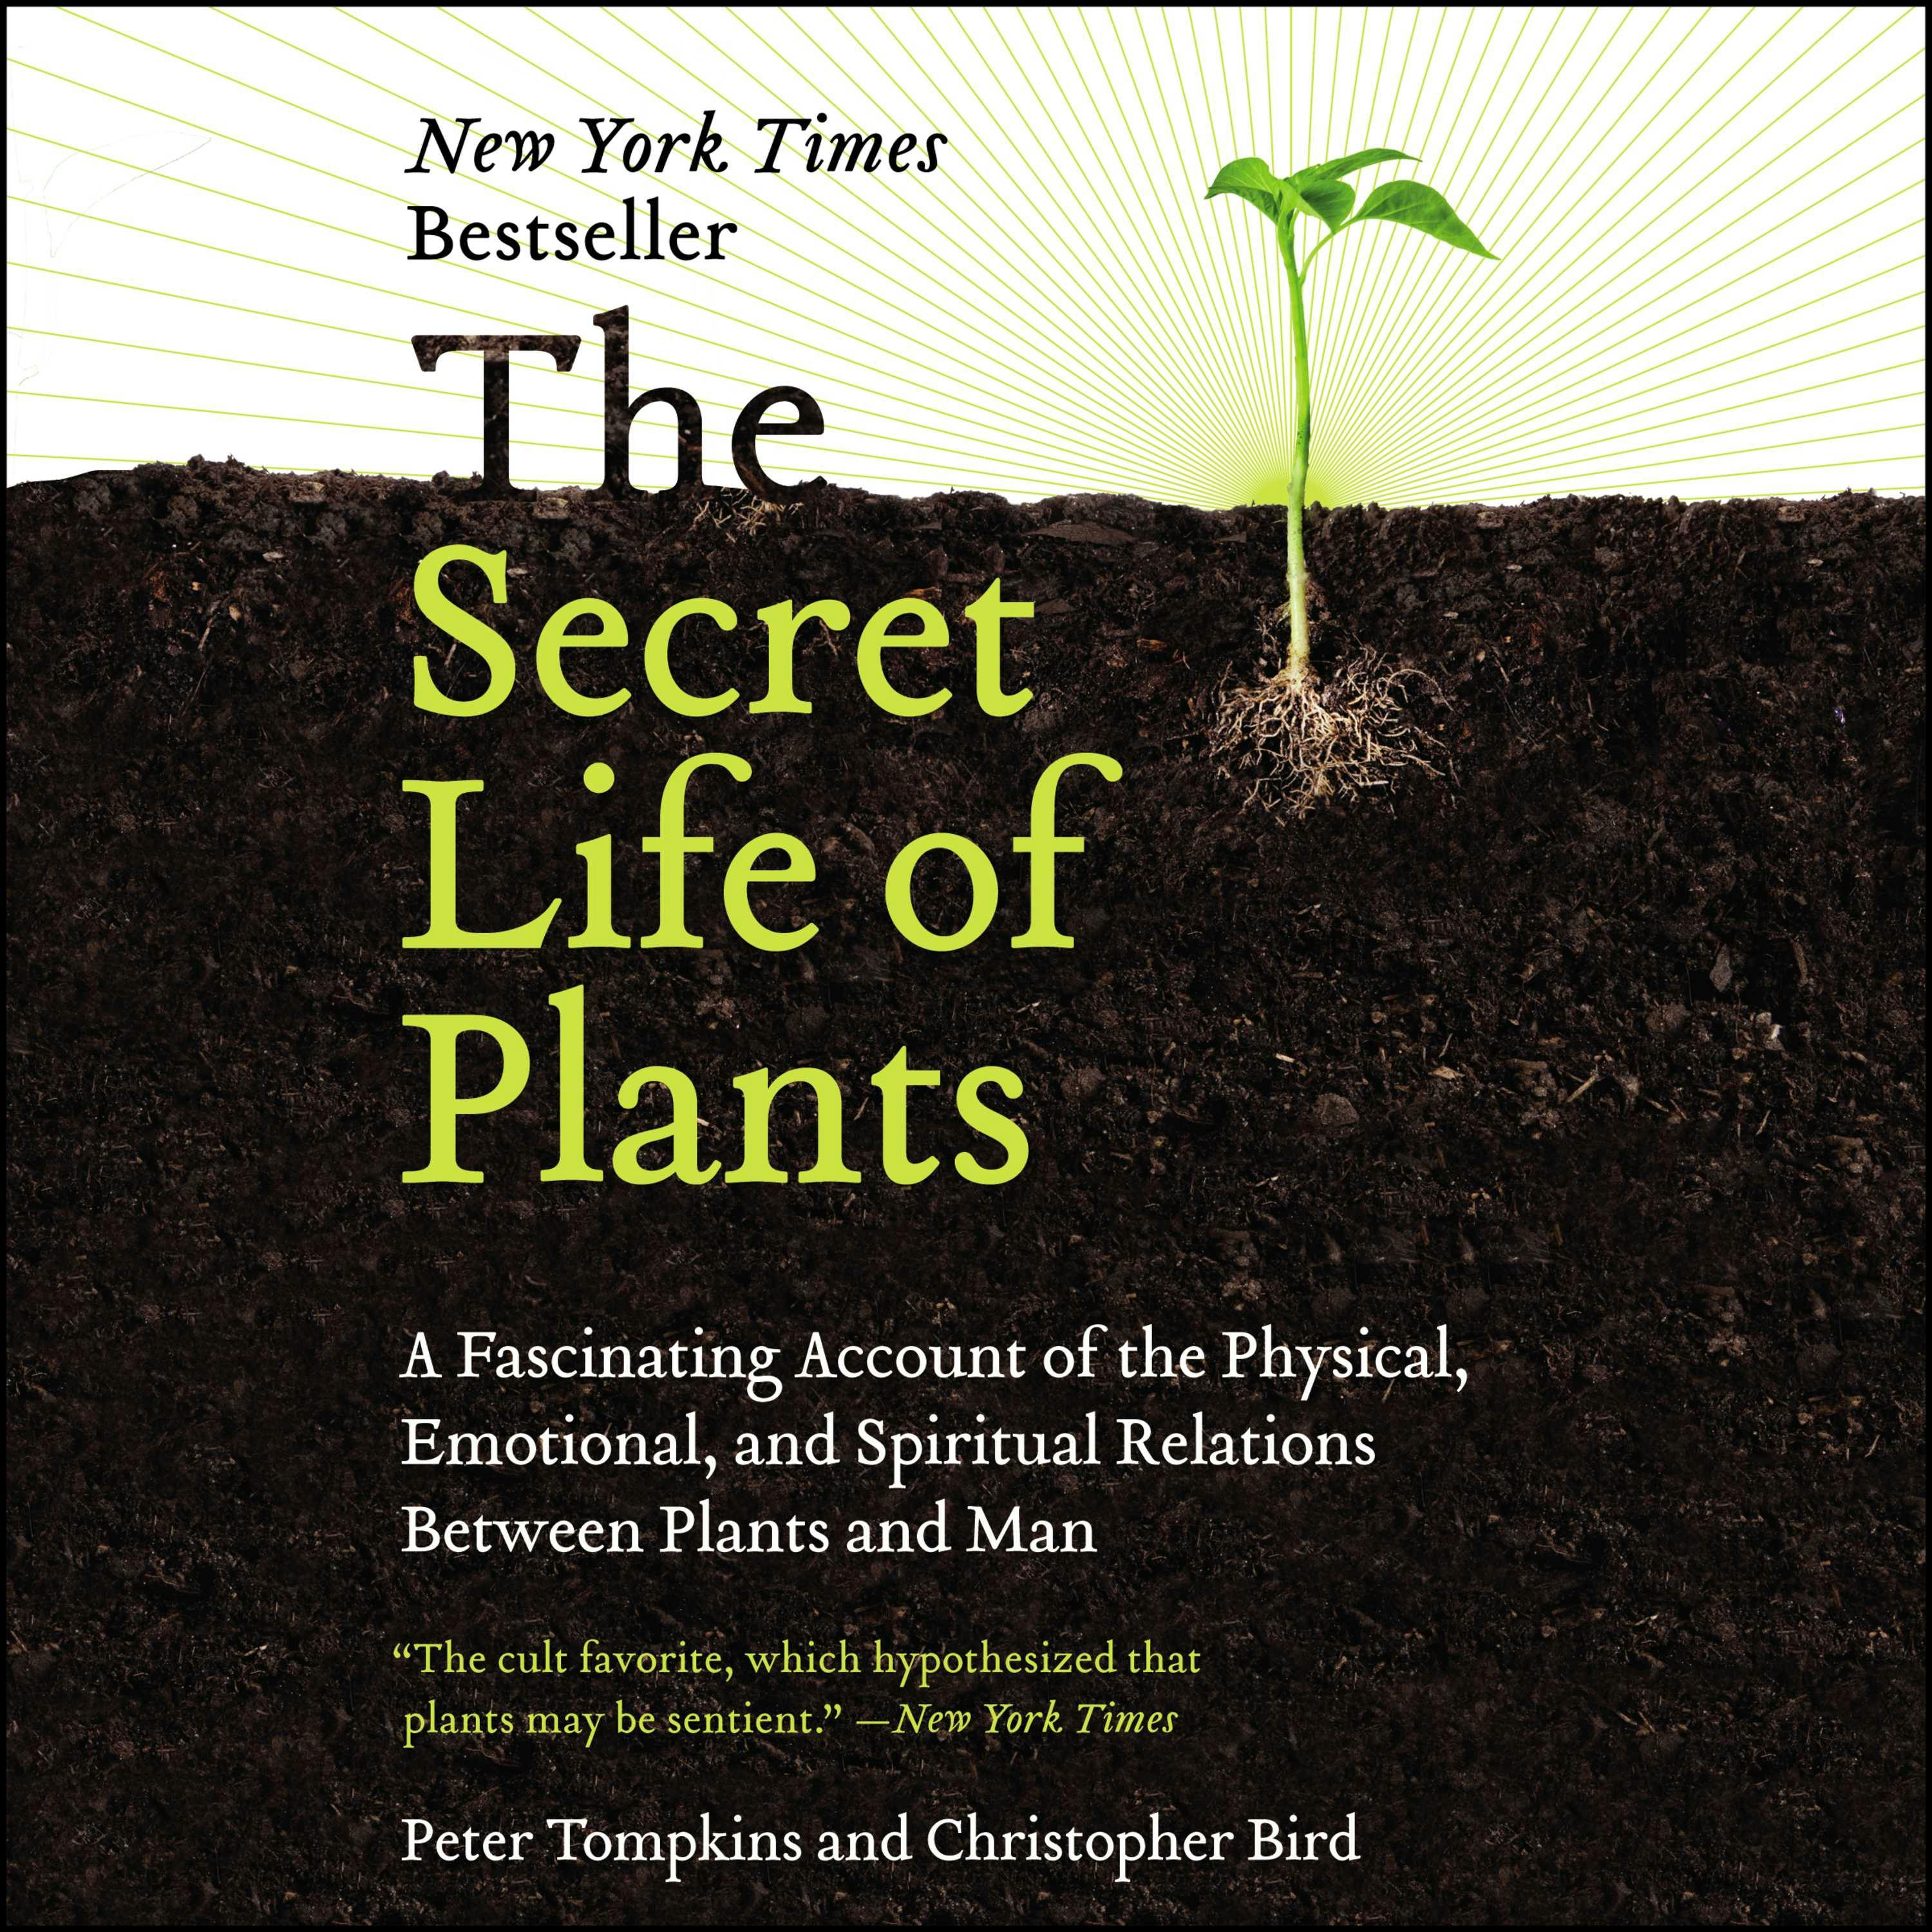 The Secret Life of Plants: A Fascinating Account of the Physical, Emotional, and Spiritual Relations Between Plants and Man - Christopher Bird, Peter Tompkins